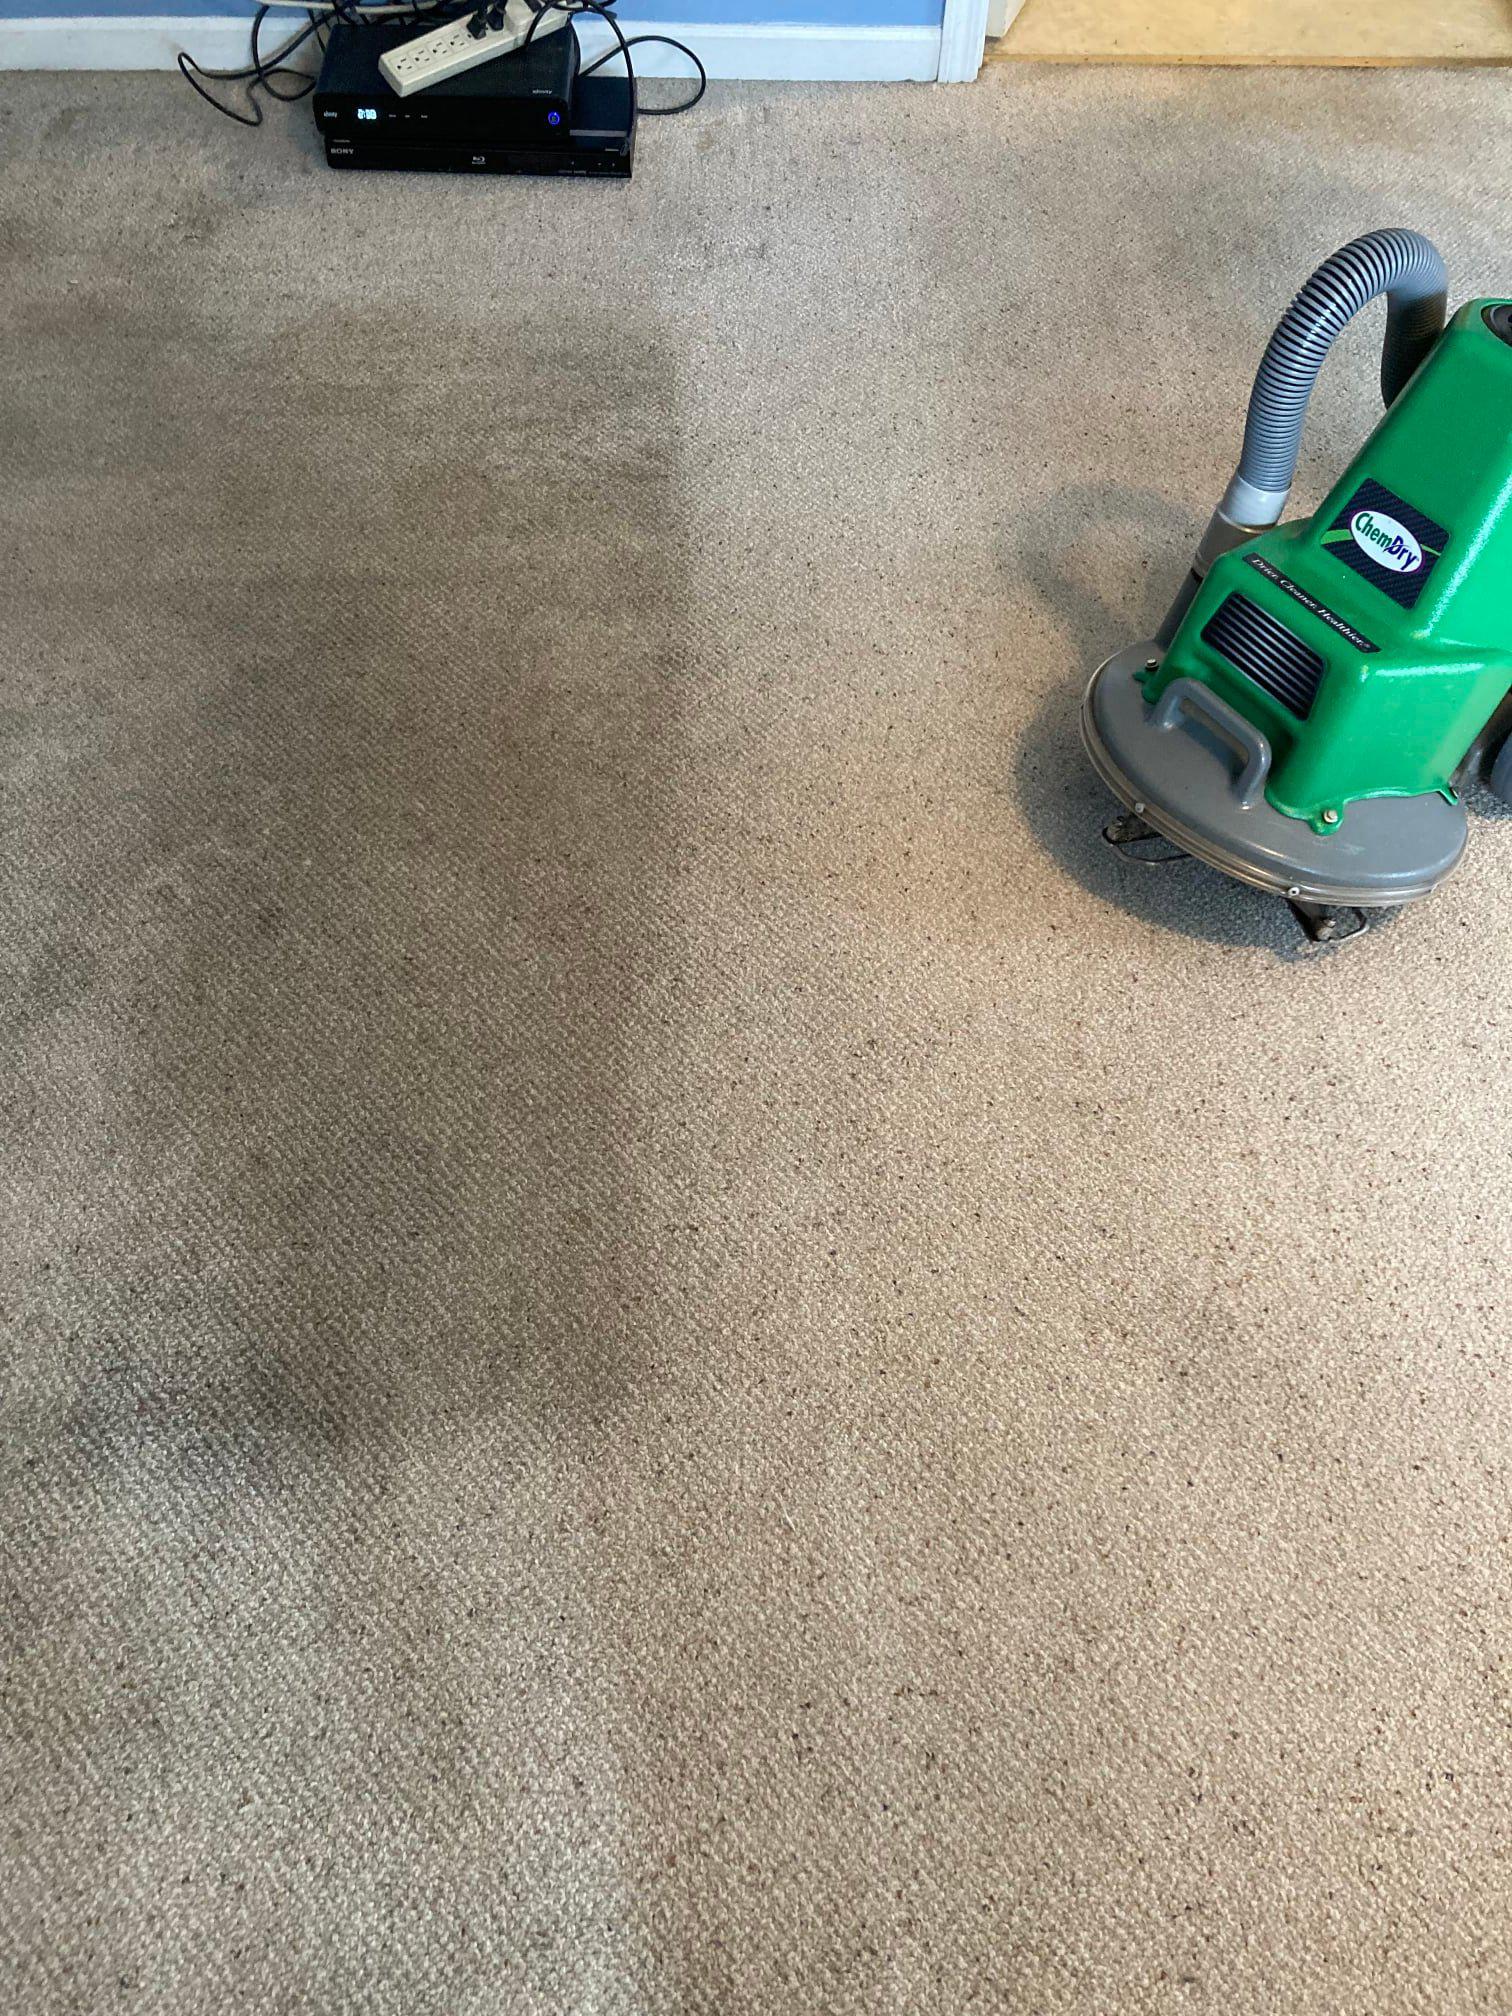 Before and after a carpet cleaning White River Chem-Dry Muncie (765)217-4337